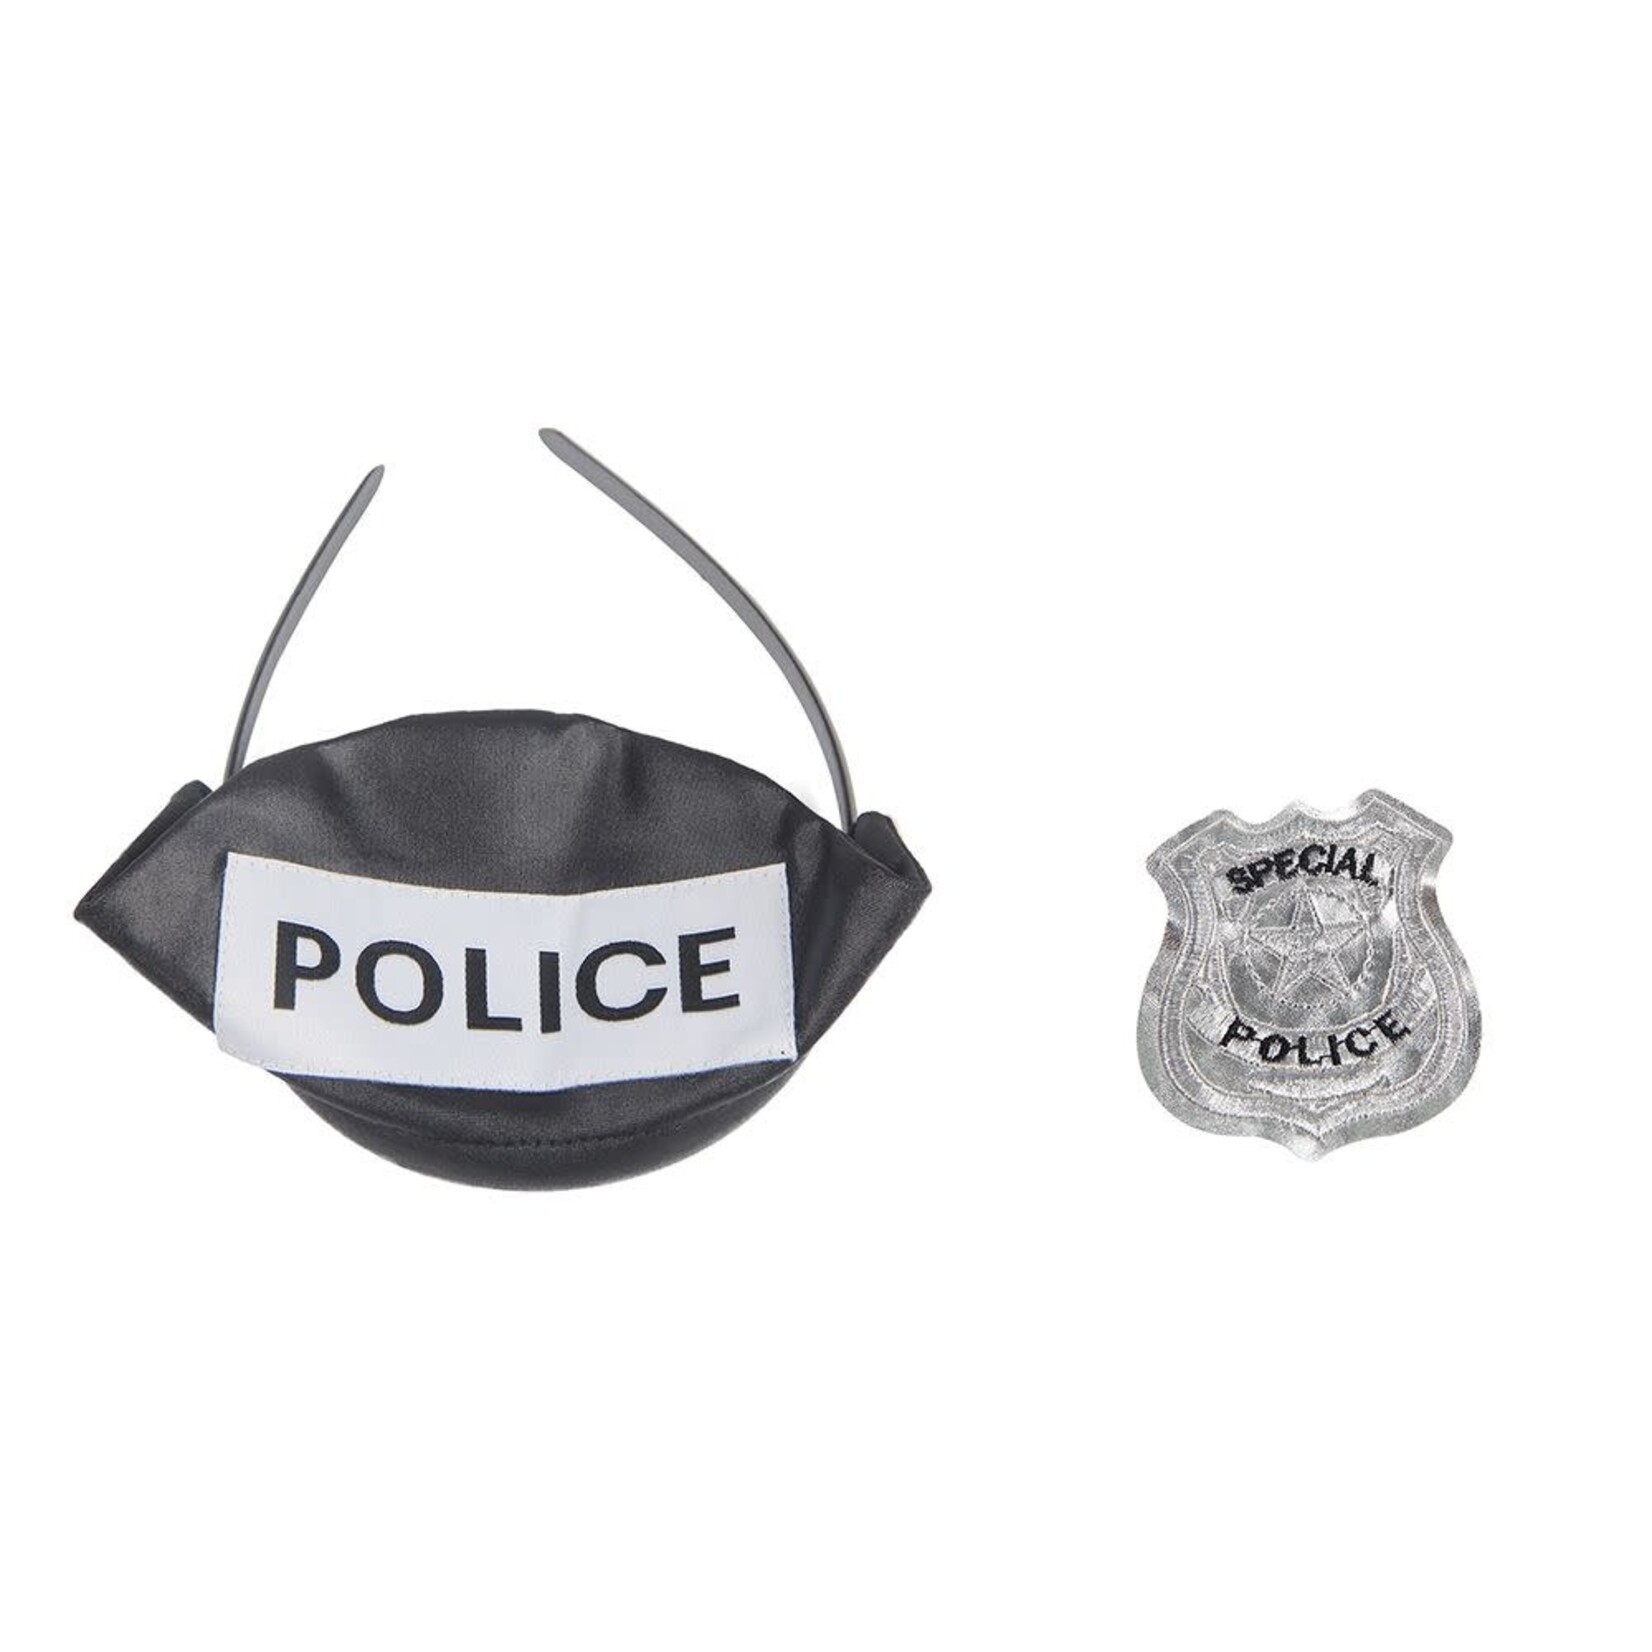 OH YEAH! -  ZIPPER FRONT HOLLOW OUT POLICE COSTUME WITH HEADWEAR M-L